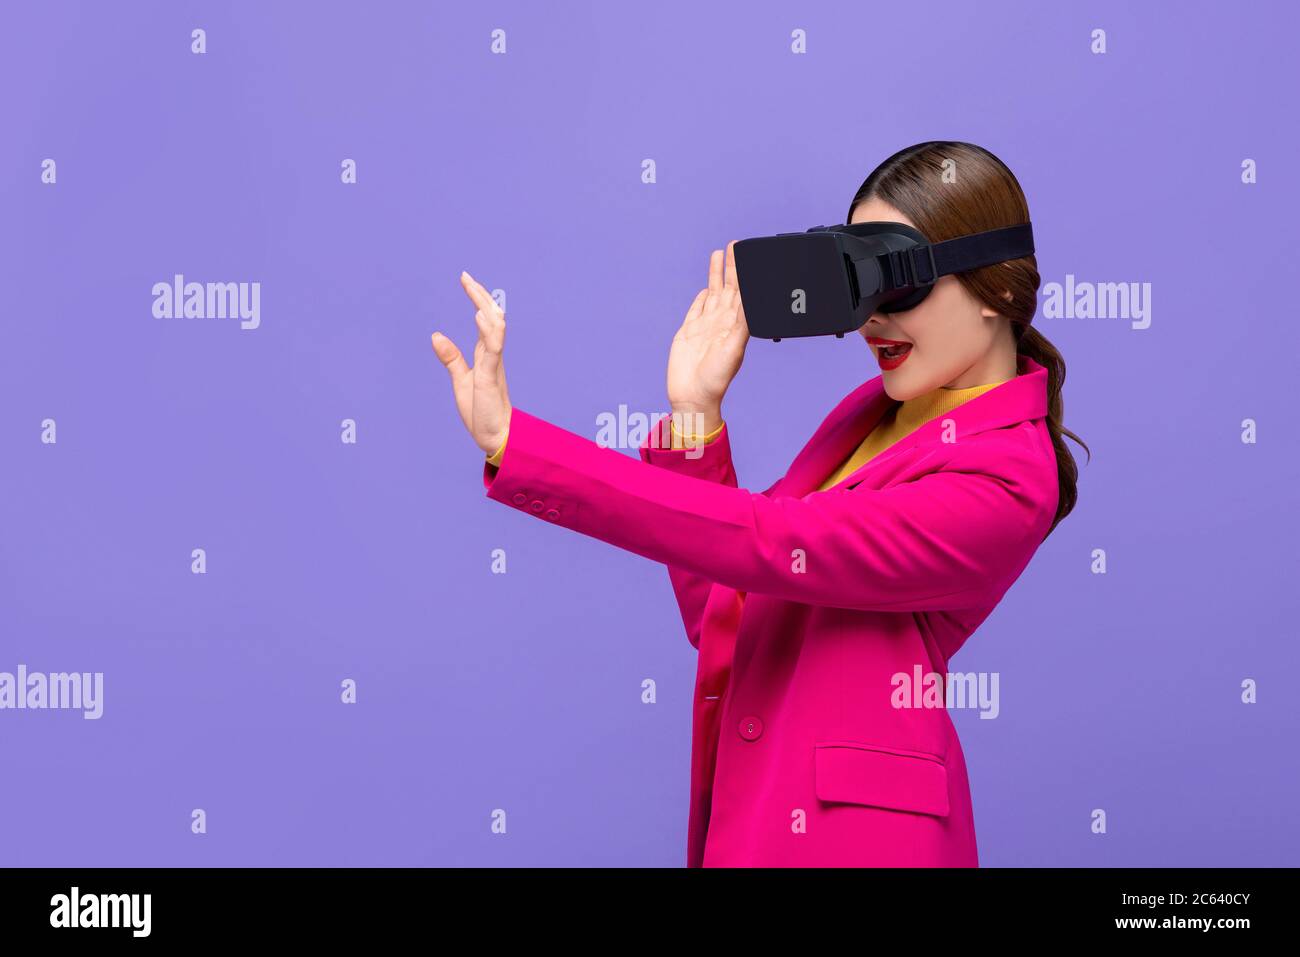 Young woman wearing virtual reality or VR glasses reaching hand out to touch something on purple isolated background Stock Photo